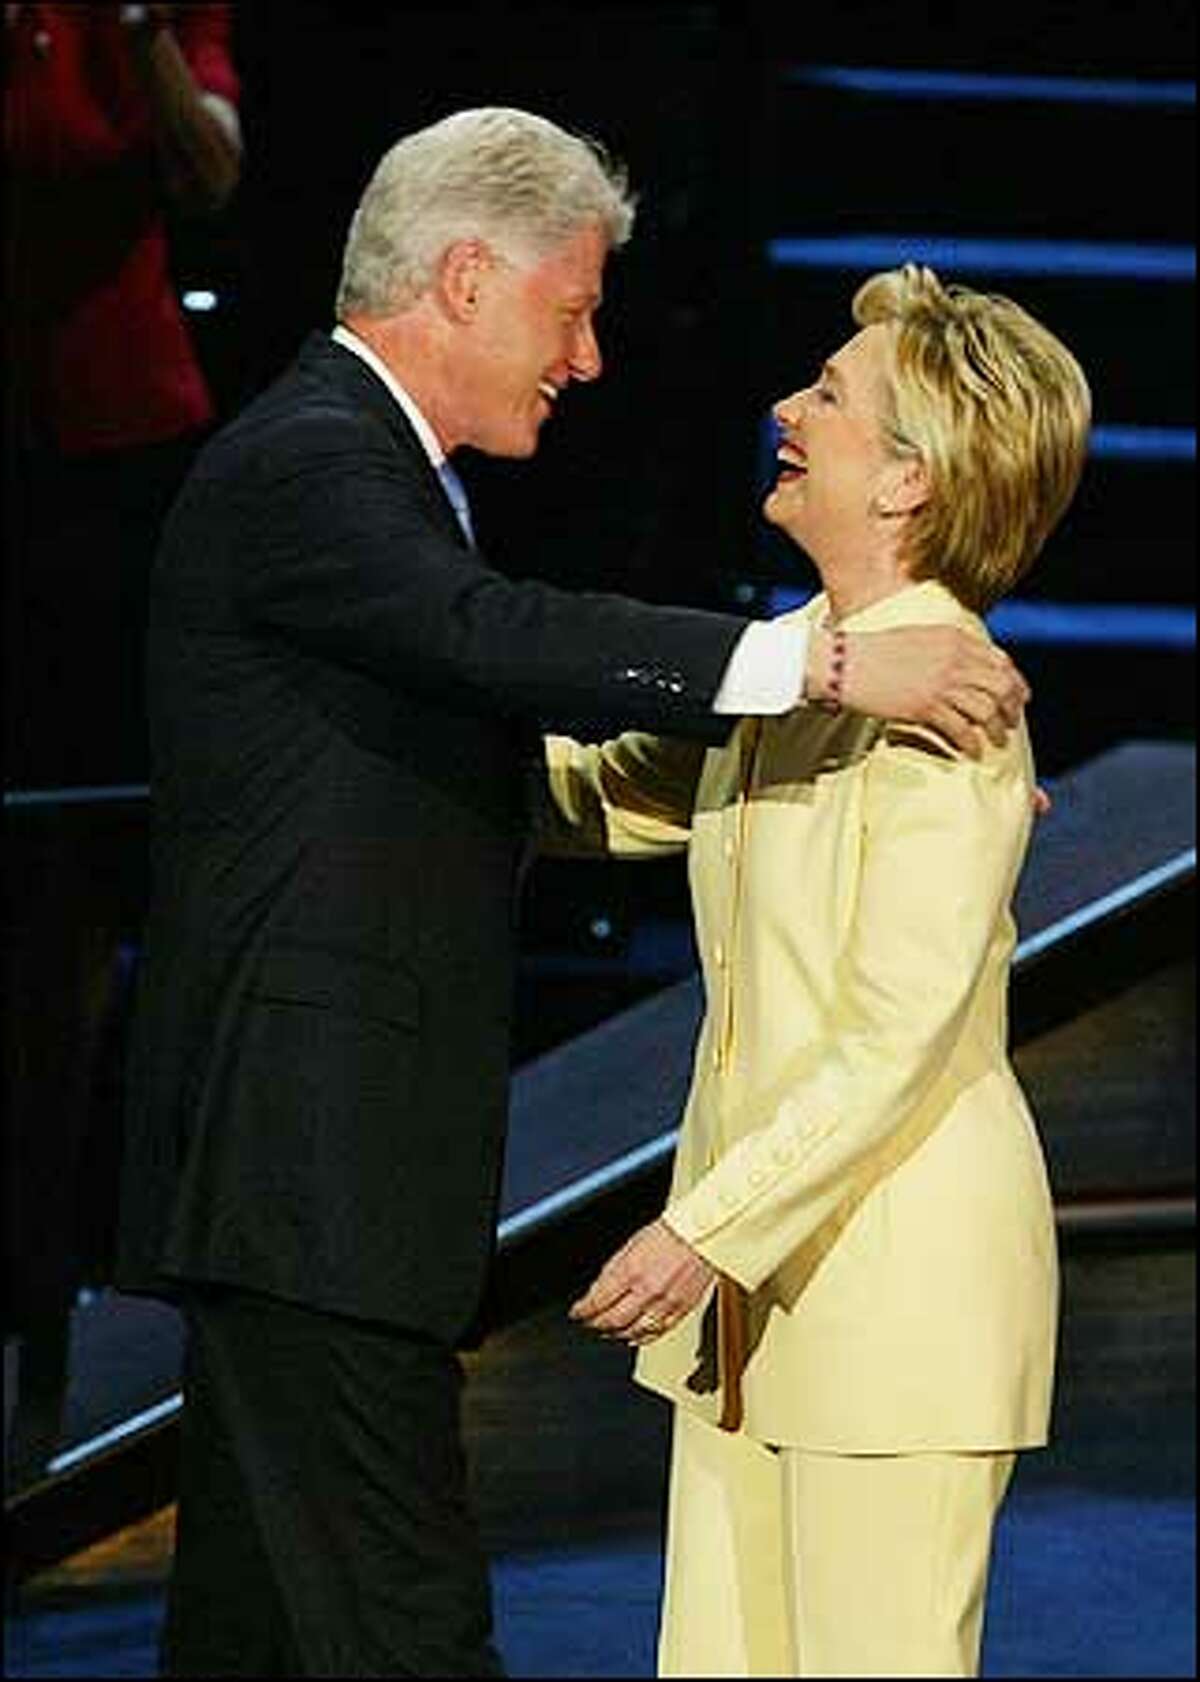 Sen. Hillary Rodham Clinton, D-N.Y., introduced her husband, former President Bill Clinton, at the Democratic National Convention.